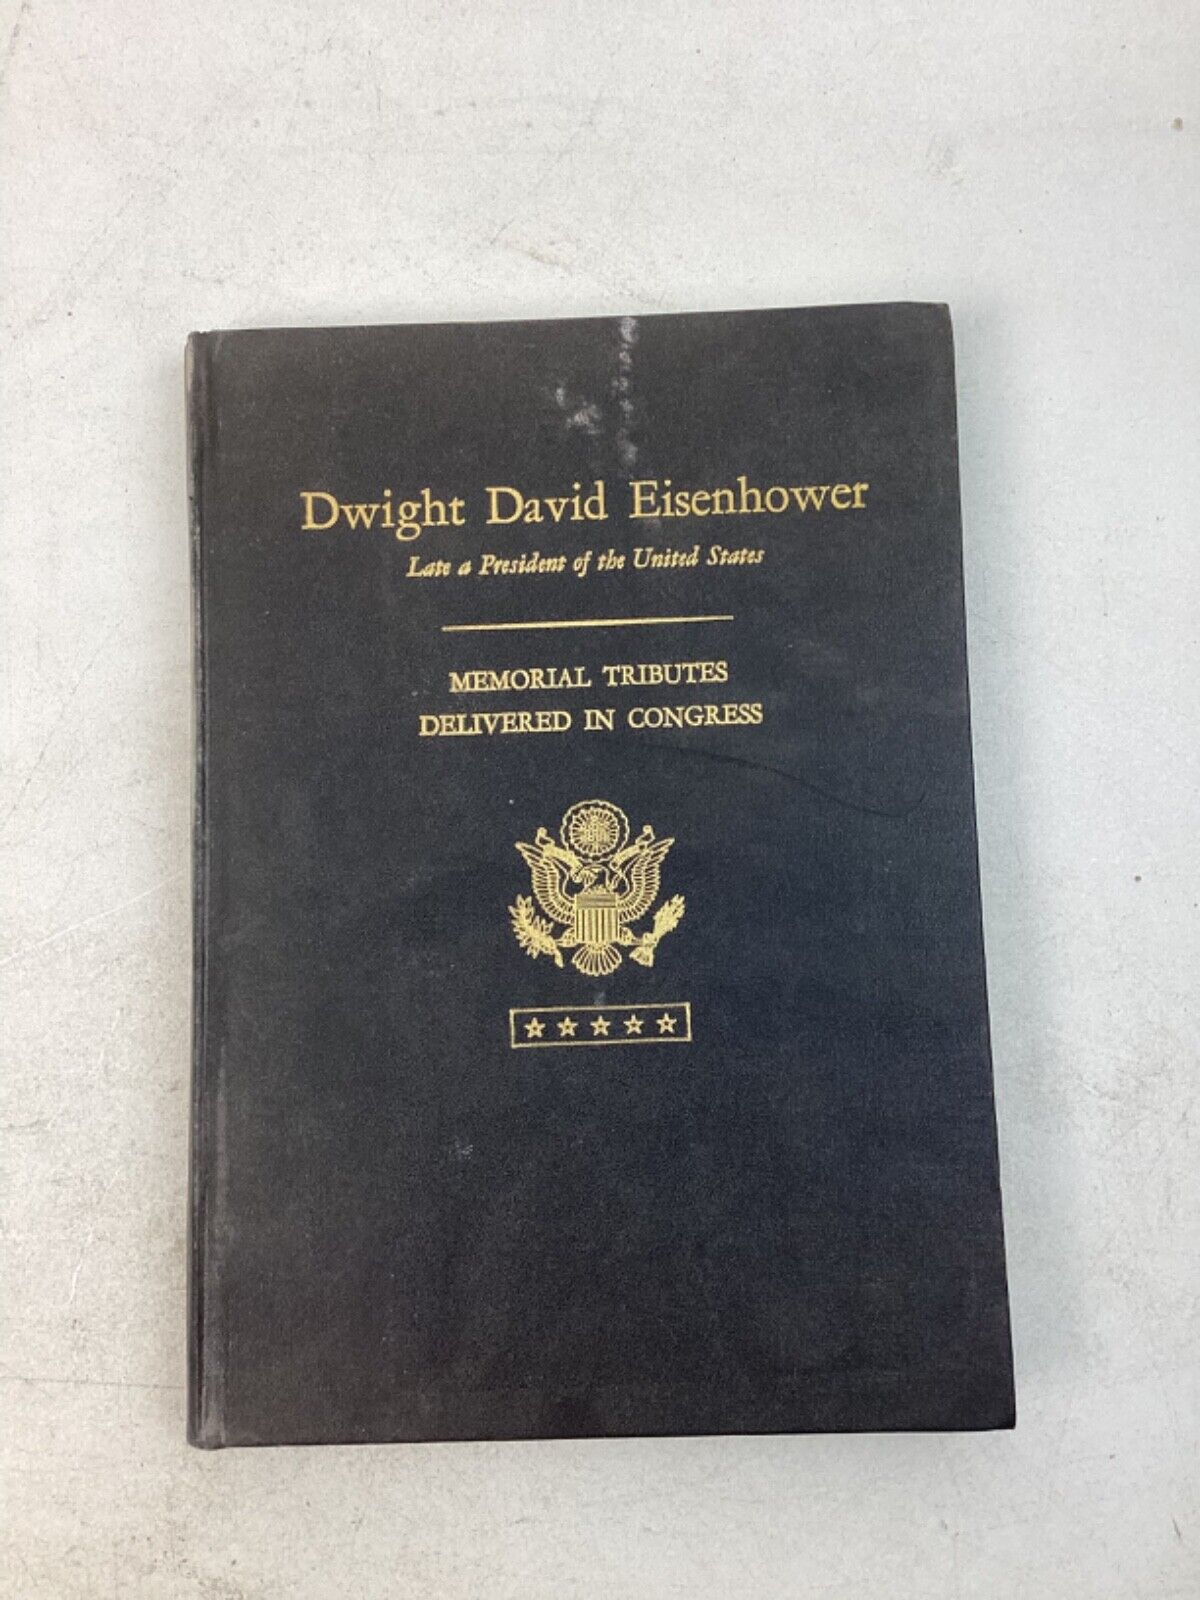 Dwight David Eisenhower Memorial Tributes Delivered In Congress 1970 Hardcover